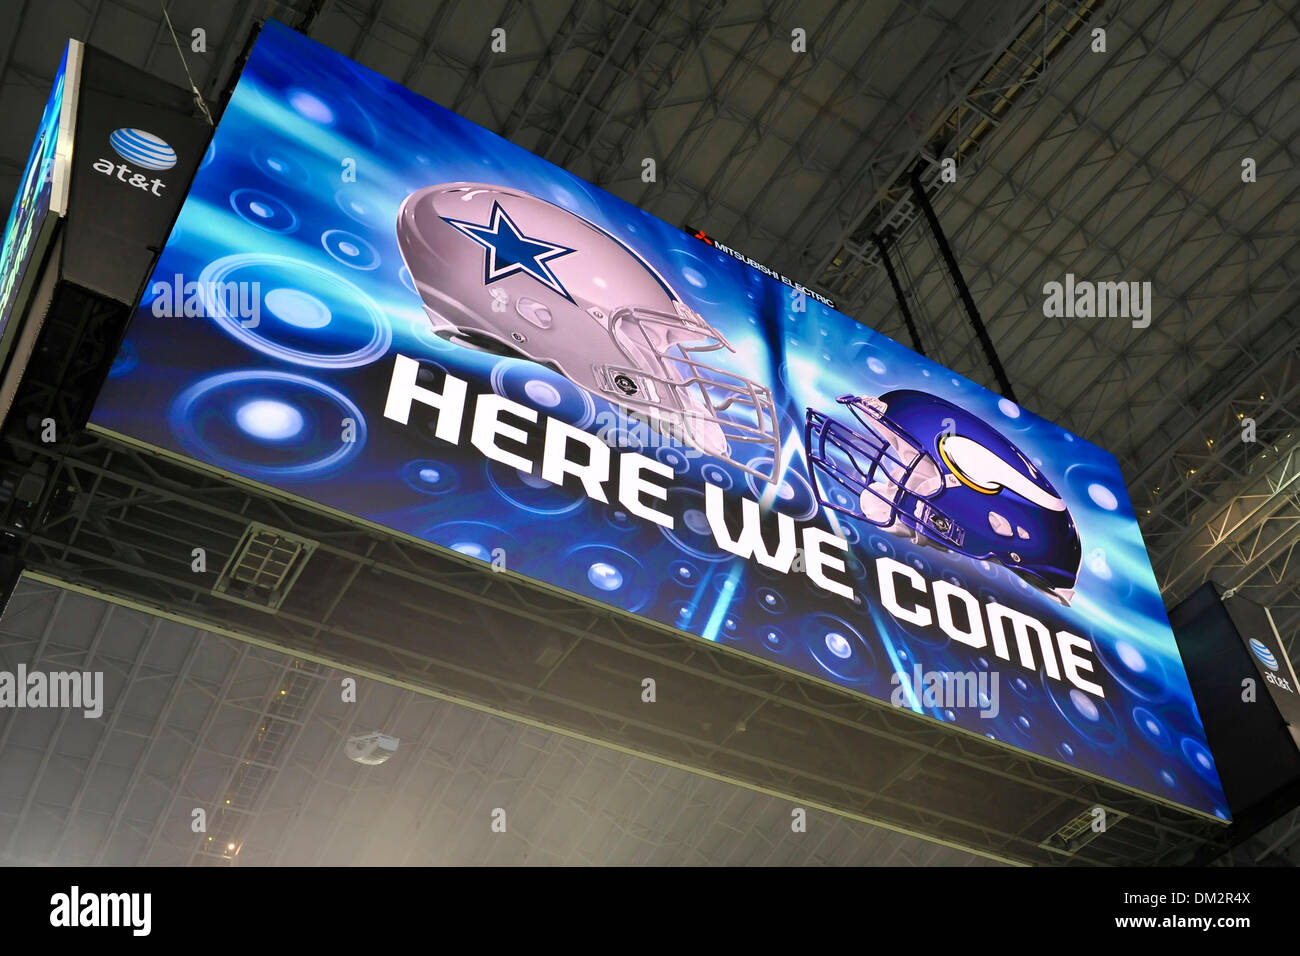 The scoreboard seconds before the end of the game in second half action in the NFL - NFC Playoffs football game between the Philadelphia Eagles and Dallas Cowboys at Cowboys Stadium in Arlington, Texas.  Cowboys defeats the Eagles, 34-14. (Credit Image: © Steven Leija/Southcreek Global/ZUMApress.com) Stock Photo